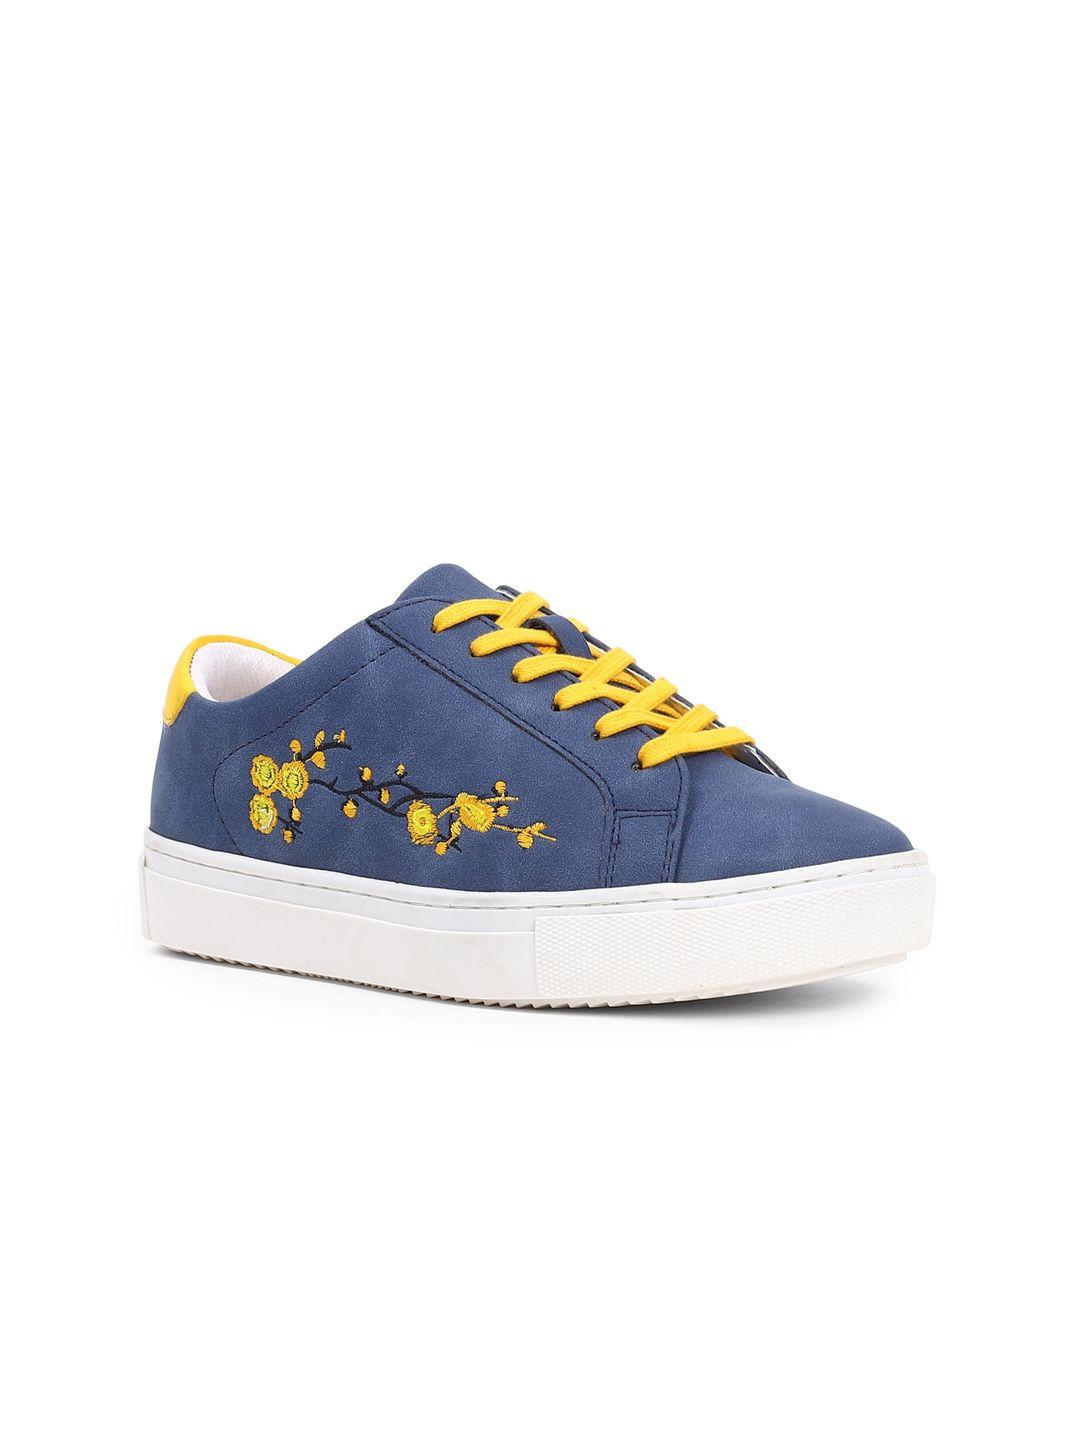 forever 21 women blue & yellow floral woven design everyday sneakers